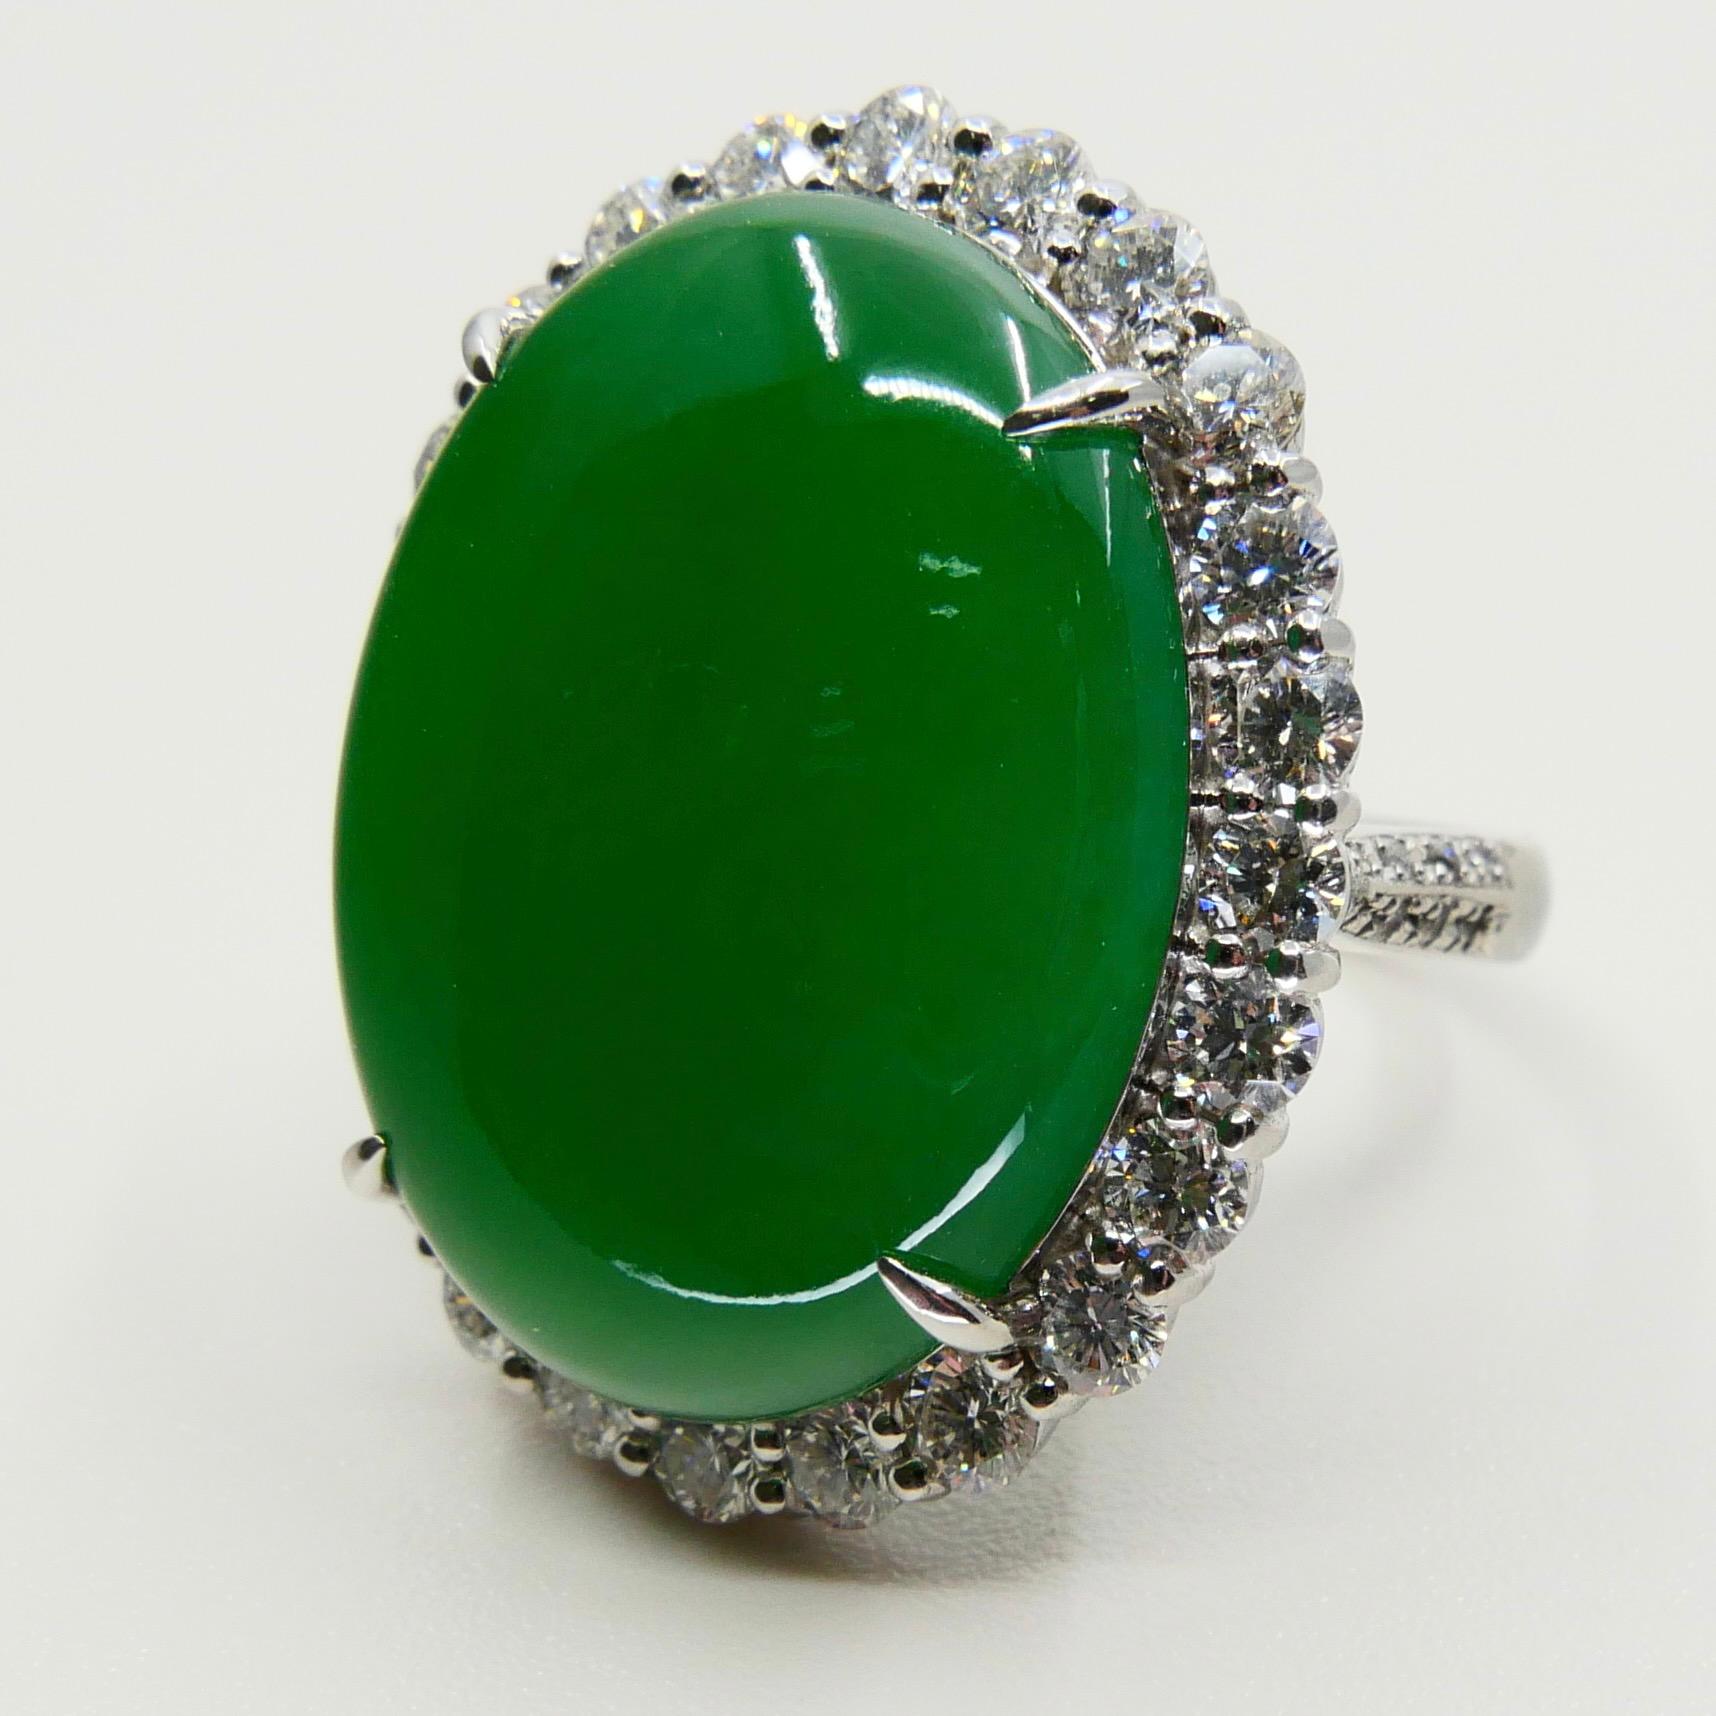 Contemporary Certified 21 Cts Jade & Diamond Cocktail Ring, Intense Apple Green, Massive